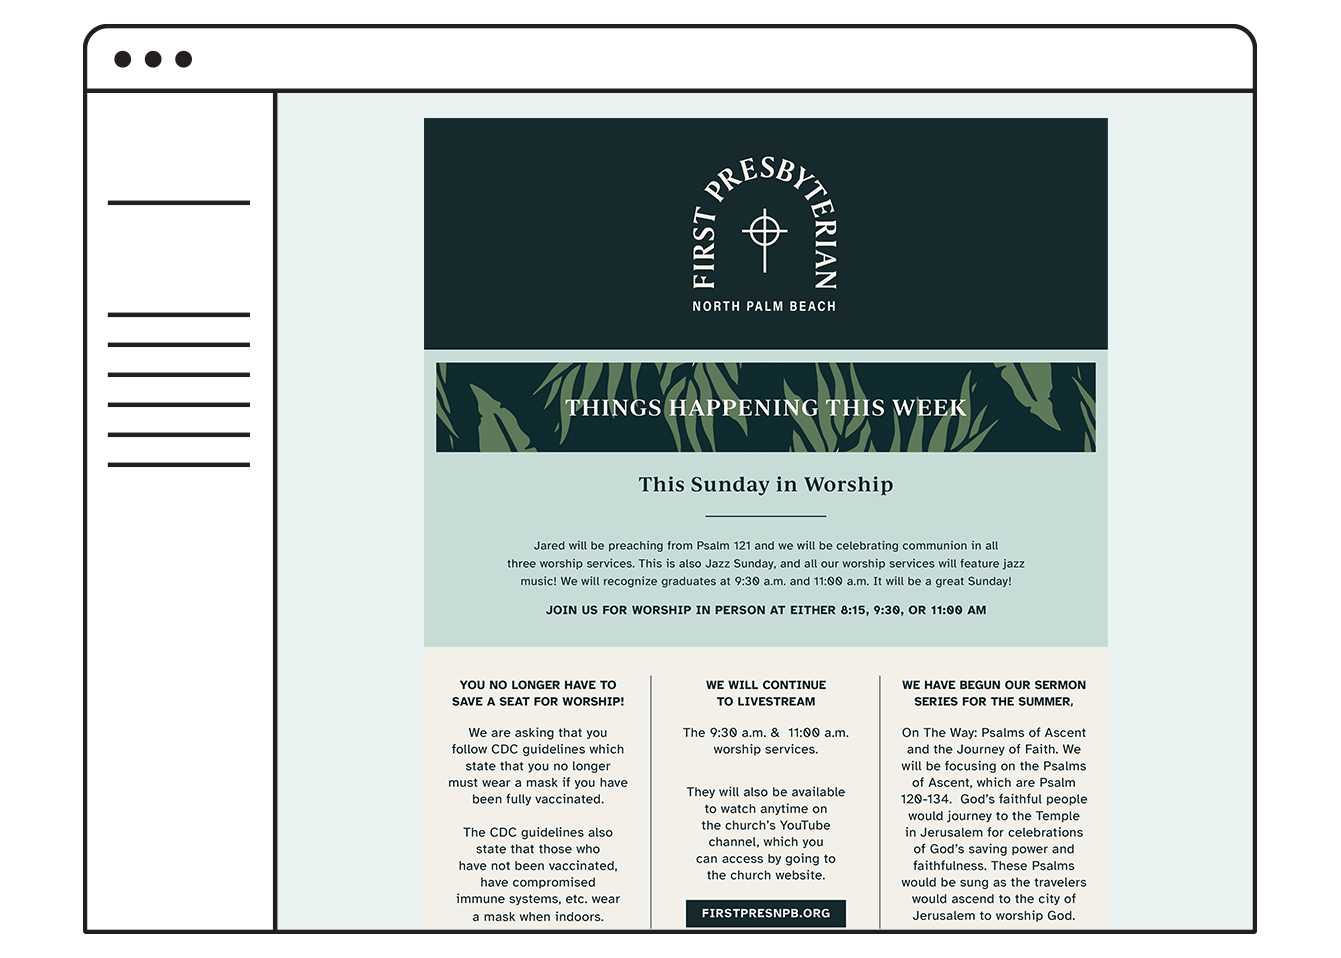 Desktop newsletter for First Presbyterian Church, shows off the application of their type & color systems within their brand guidelines.